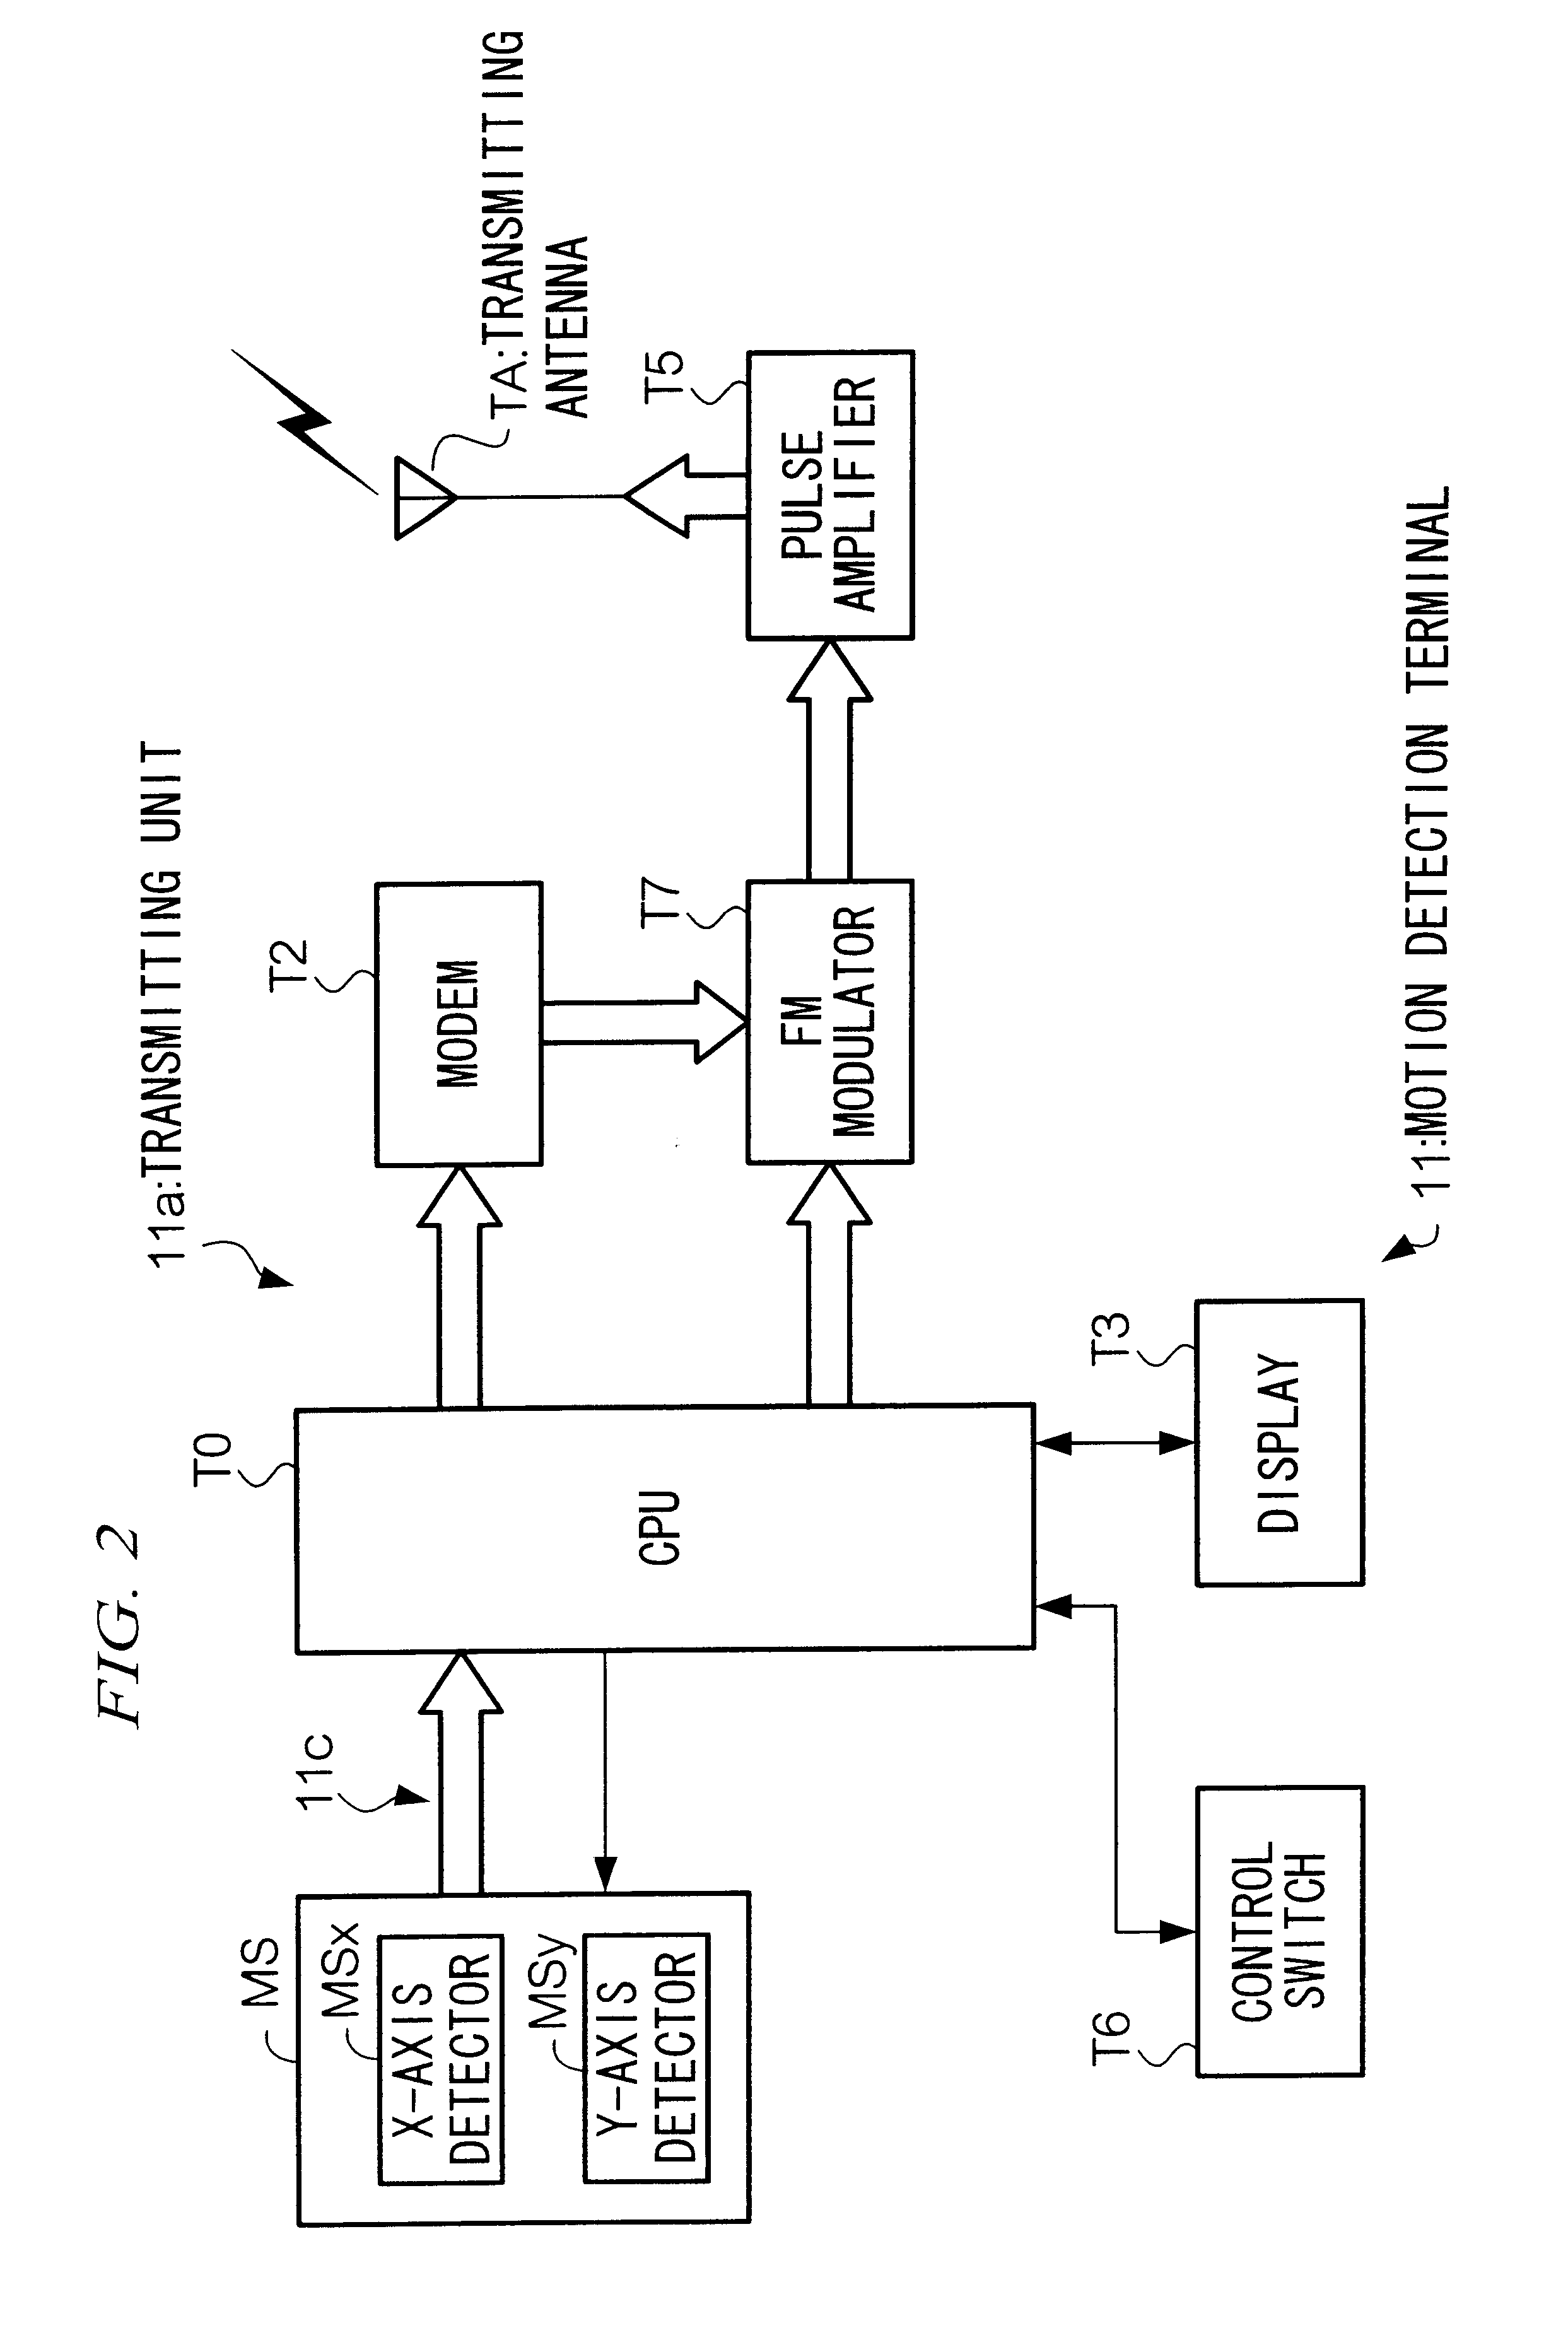 Tone generation controlling system